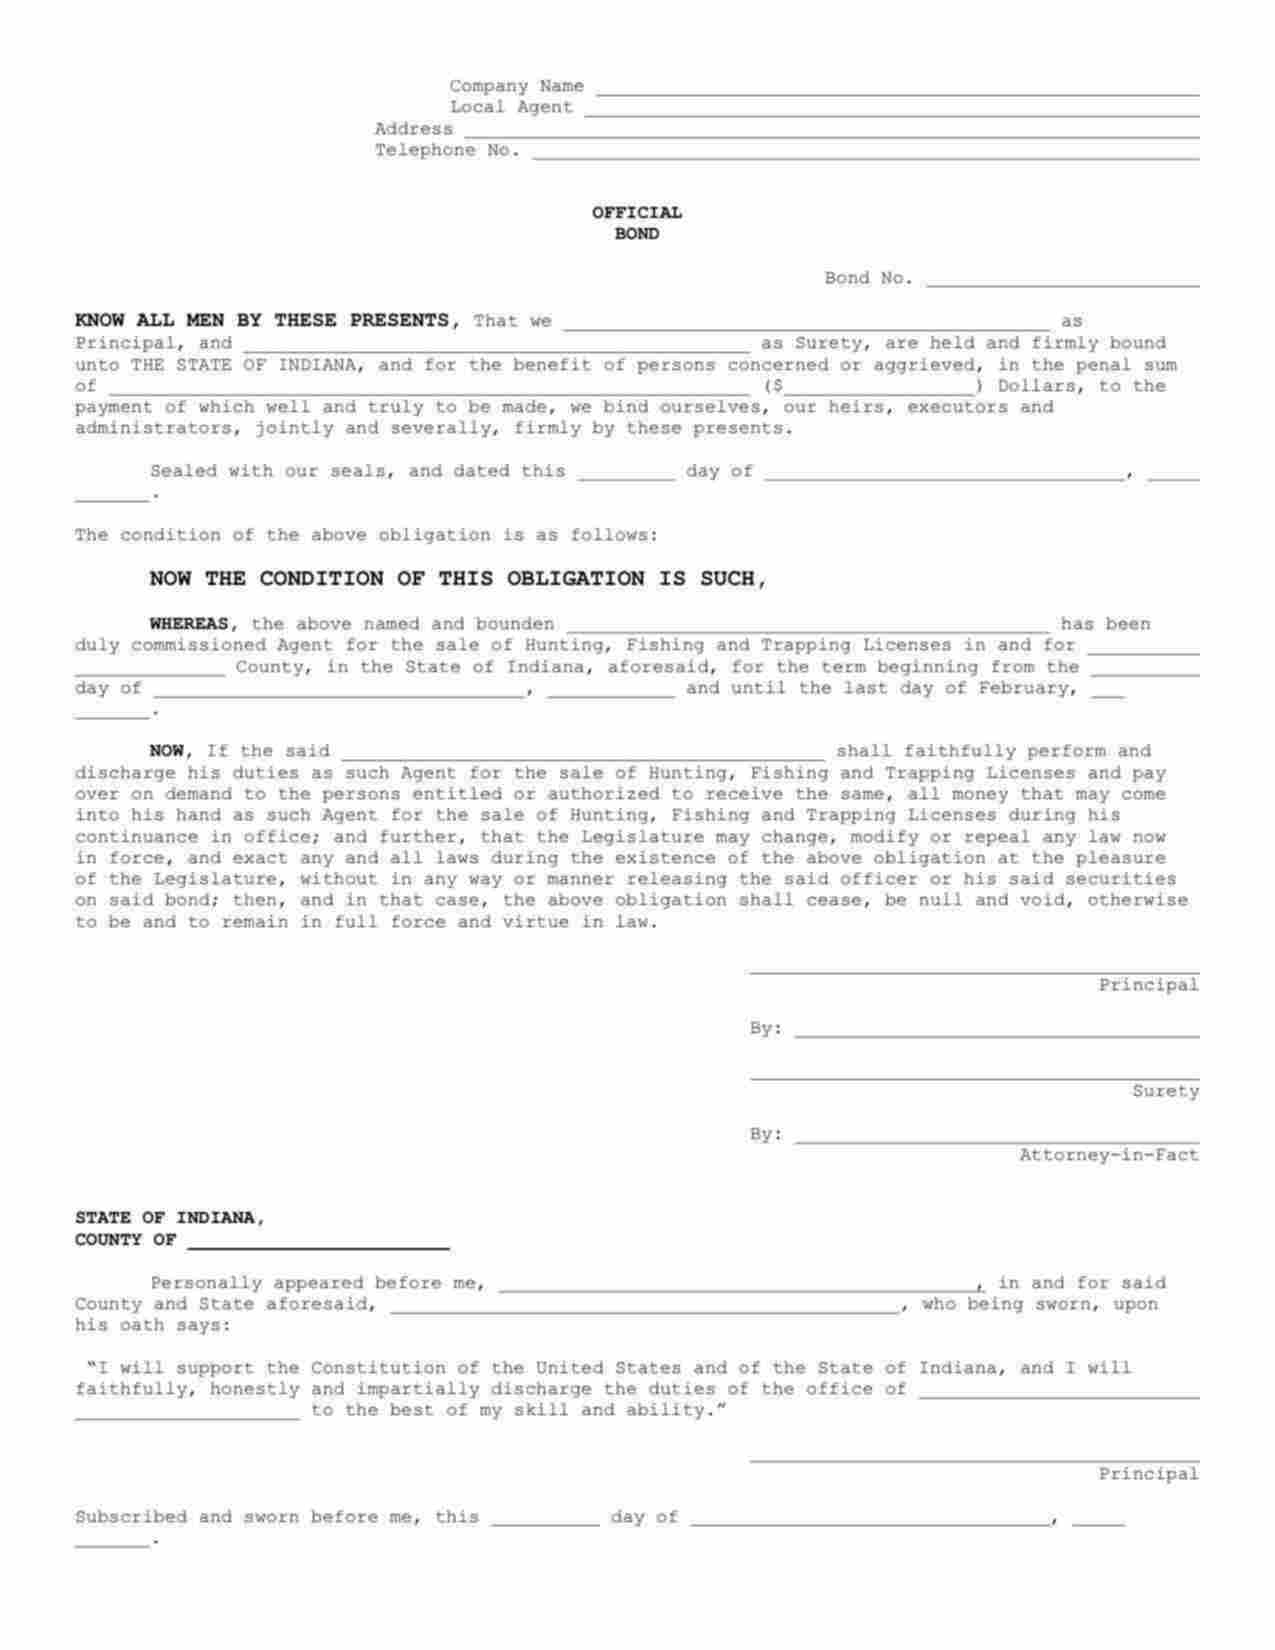 Indiana Hunting, Fishing and Trapping License Agent Bond Form